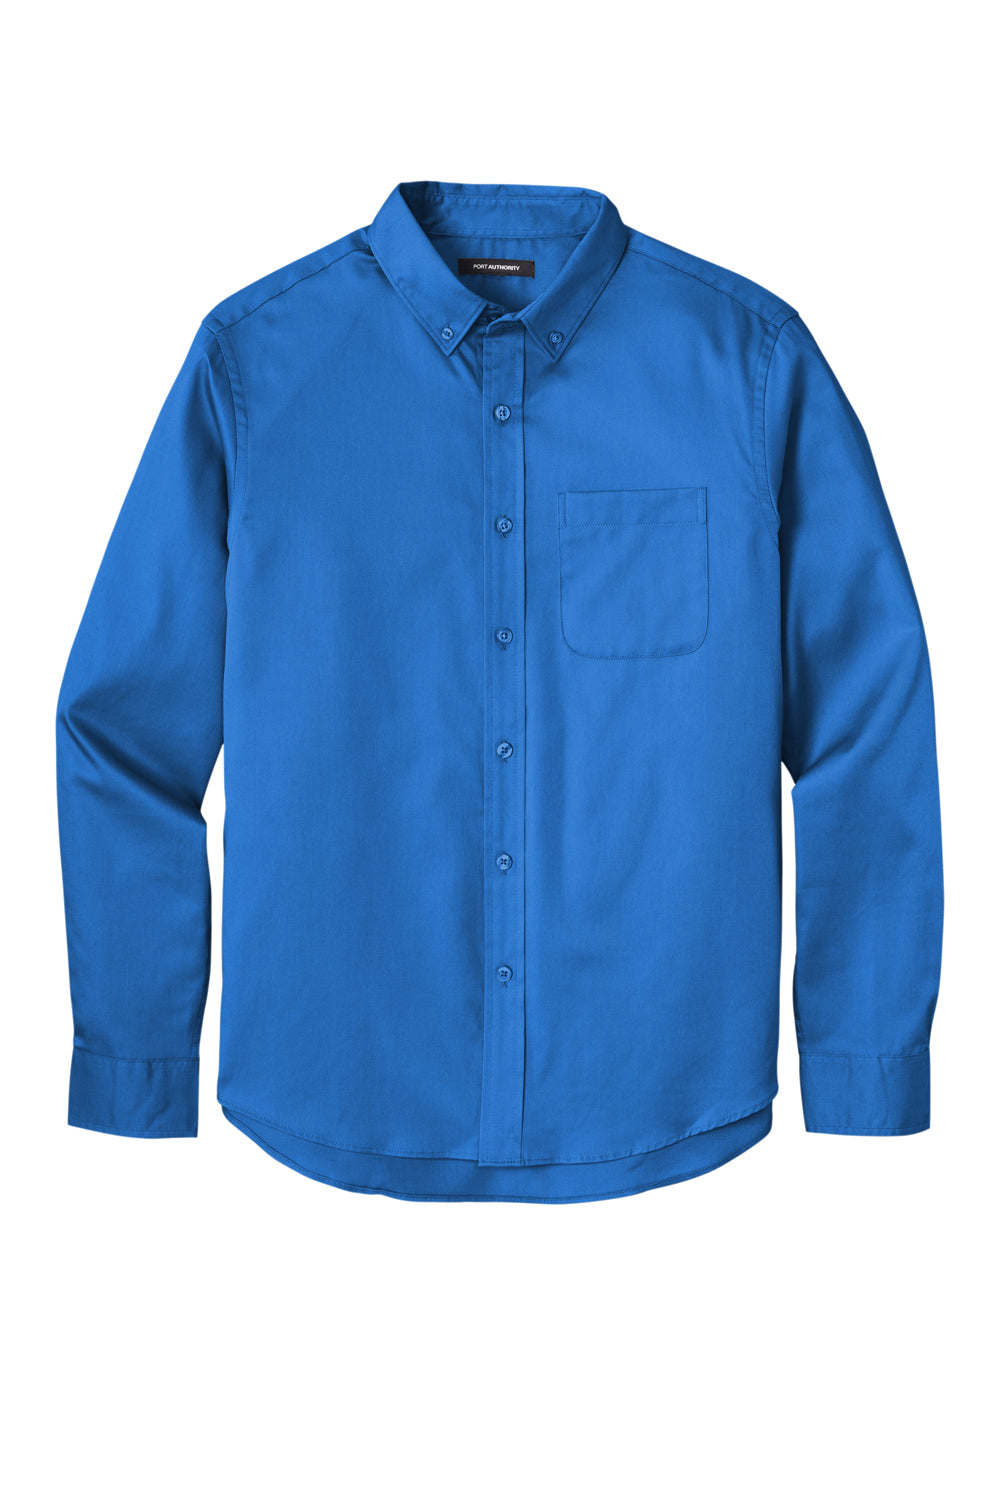 Port Authority W808 SuperPro Wrinkle Resistant React Long Sleeve Button Down Shirt w/ Pocket Strong Blue Flat Front